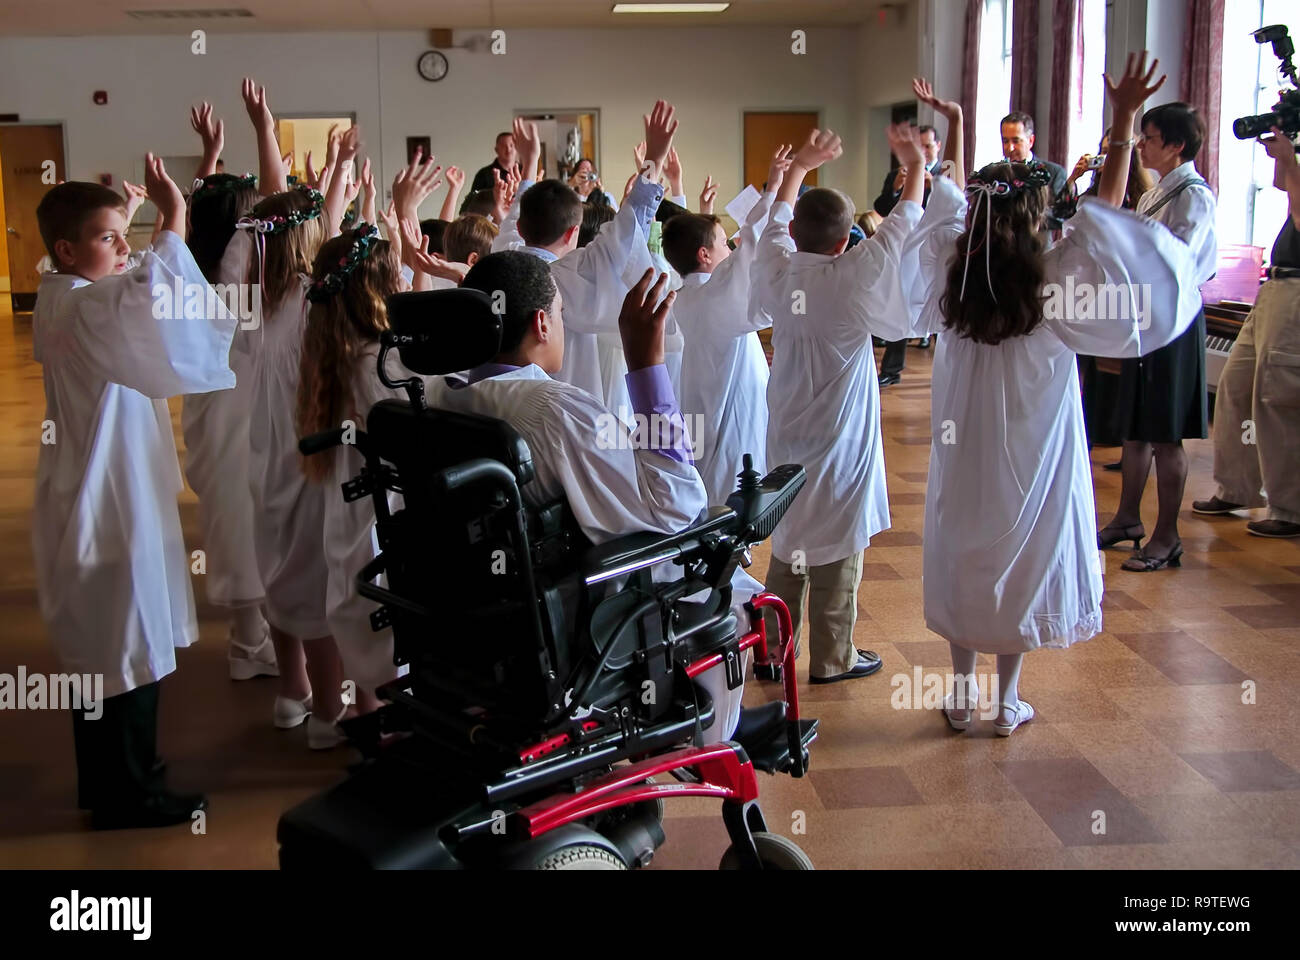 Middletown, CT USA. May 2009. Physically disabled young man in wheelchair looked on by a curious boy while participating in First Communion activities. Stock Photo